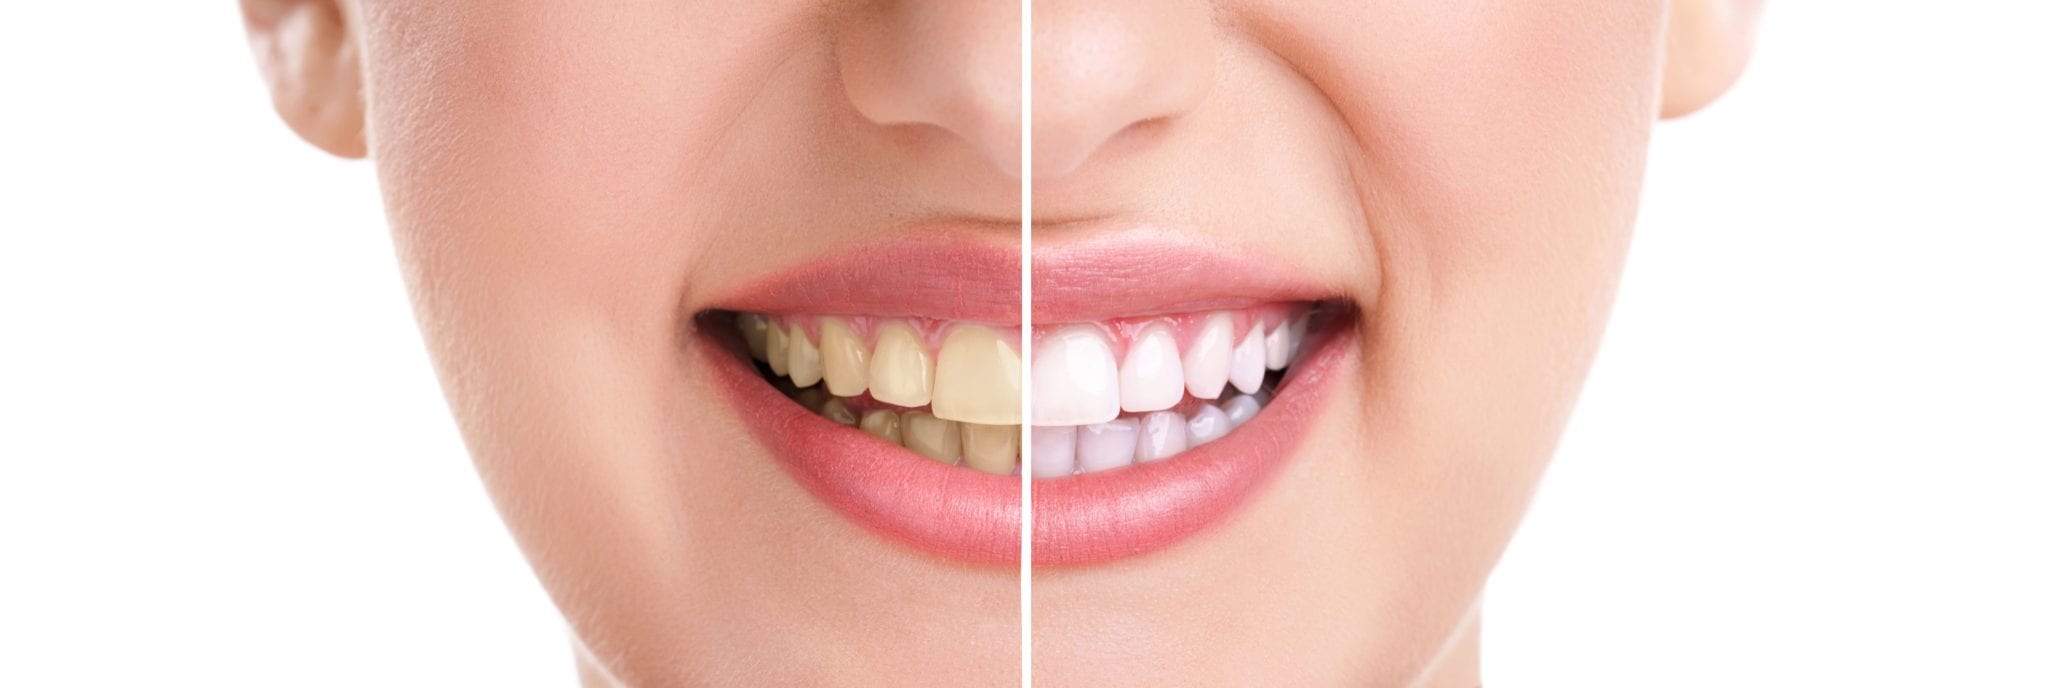 Before and After Teeth Whitening Photo of Model